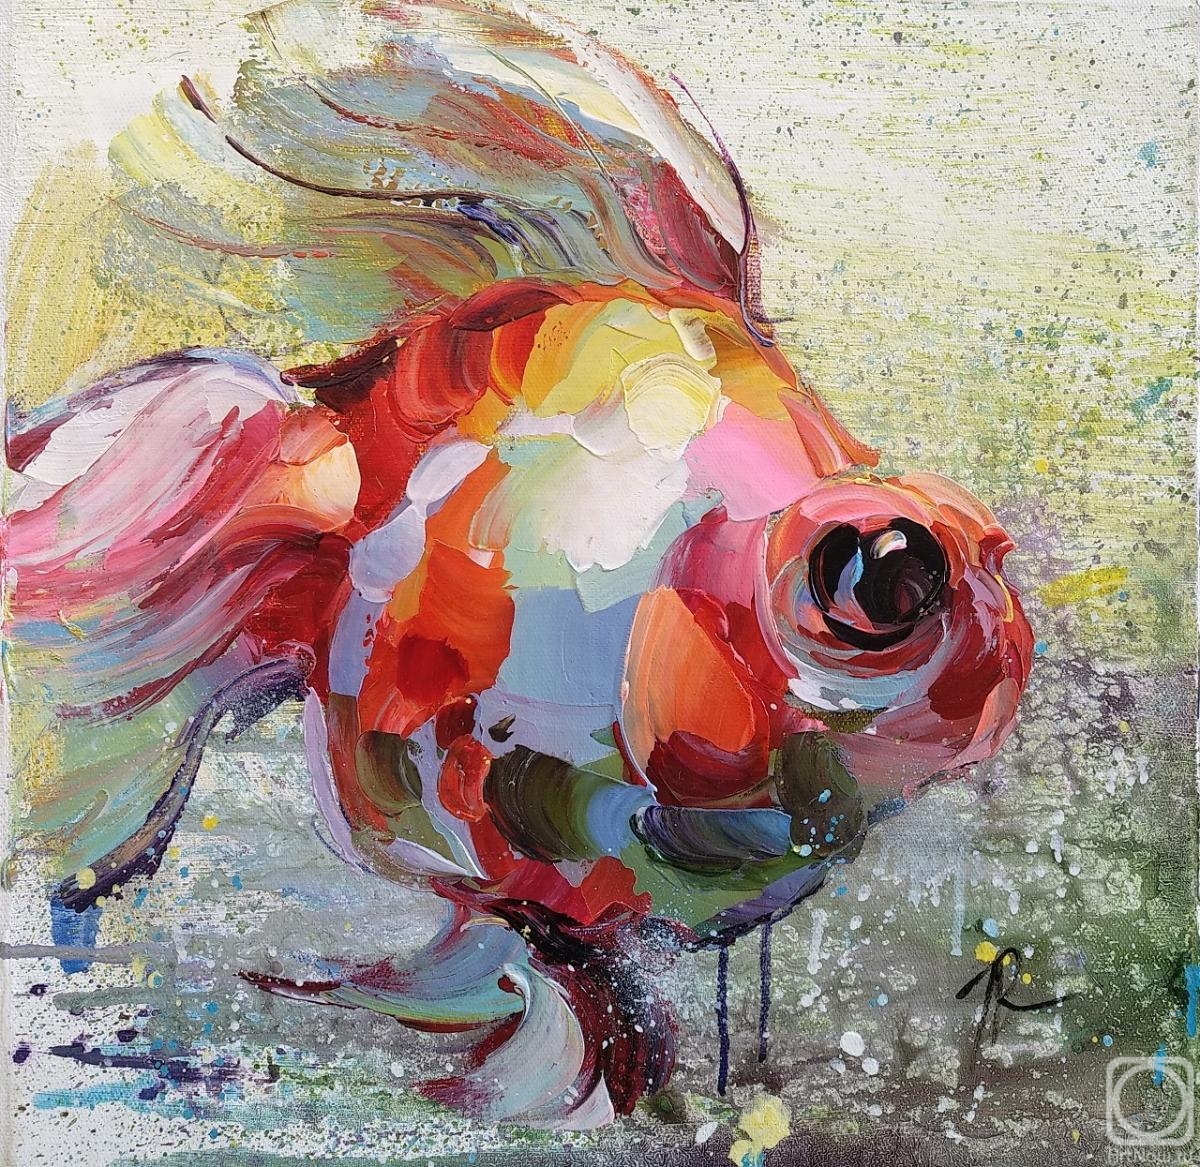 Rodries Jose. Goldfish for the fulfillment of desires. N14